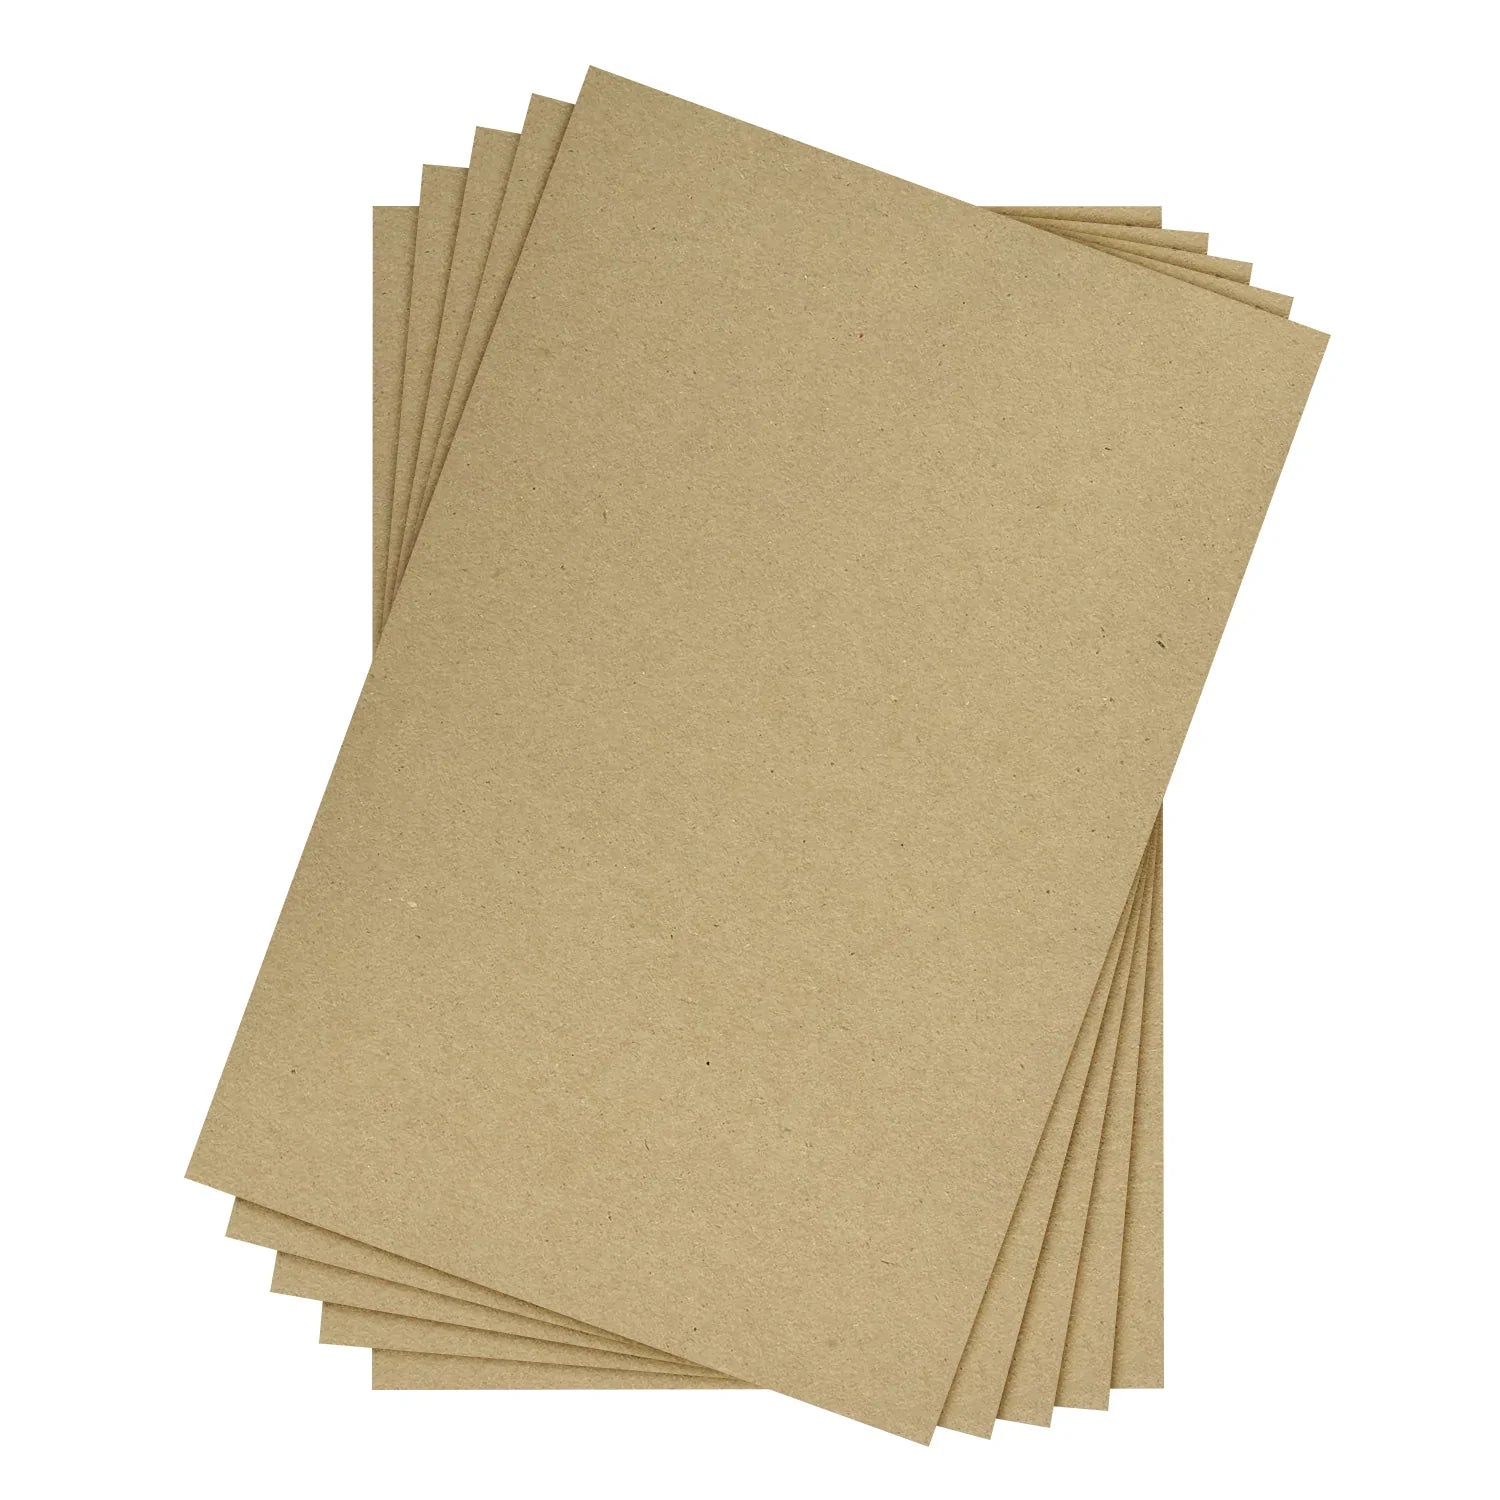 3-inch Round Cardboard Paper, 25 Pcs Blank Circles for DIY Craft Arts,  Brown